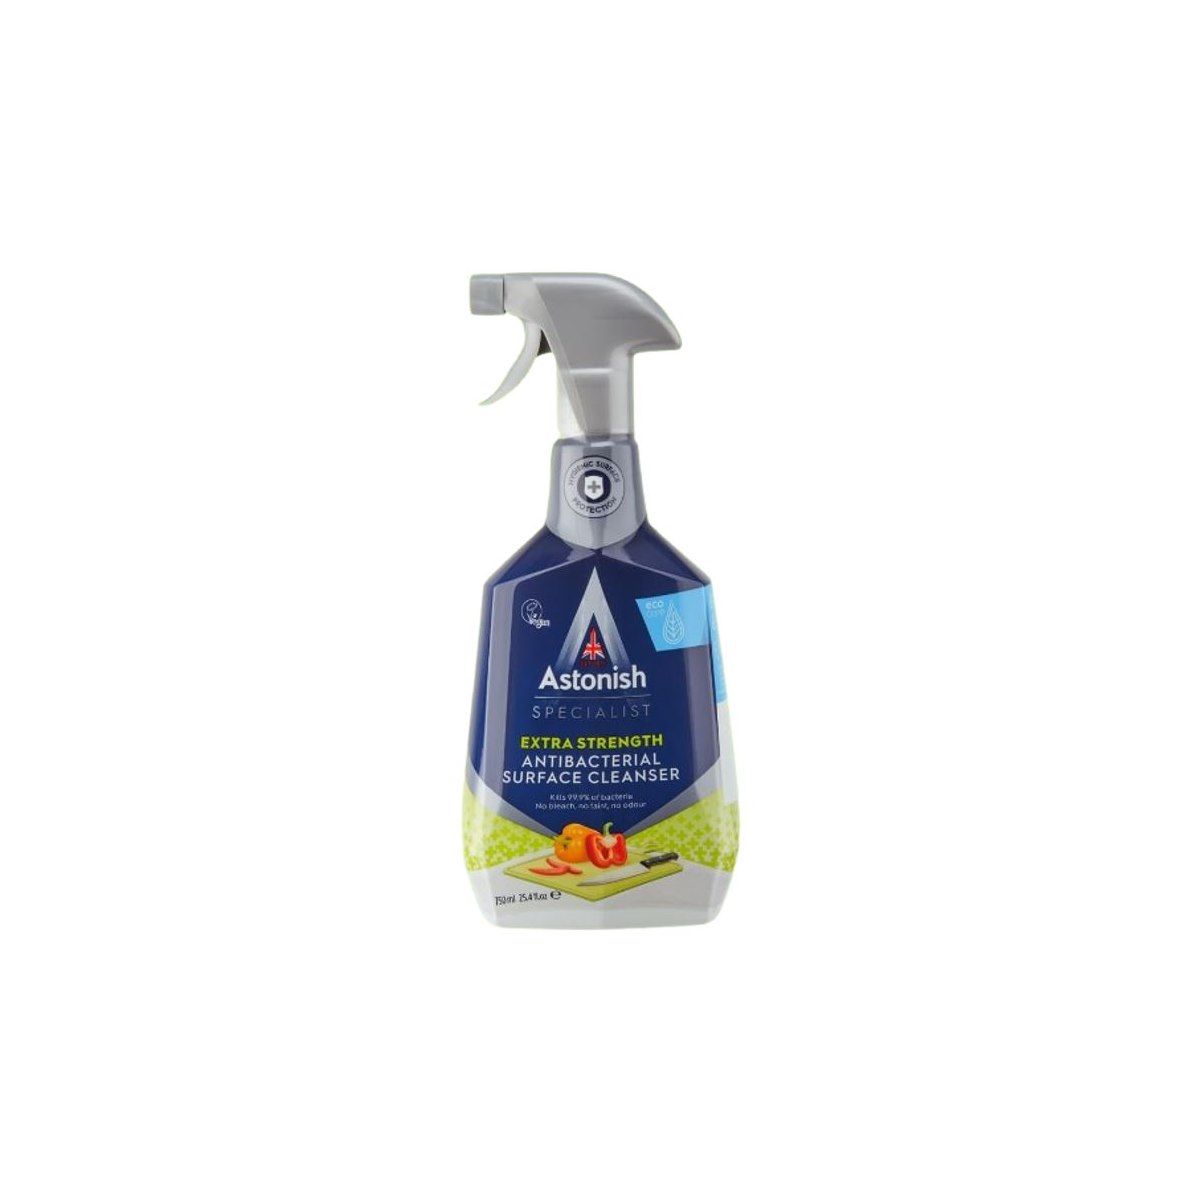 Astonish Specialist Extra Strength Antibacterial Surface Cleanser